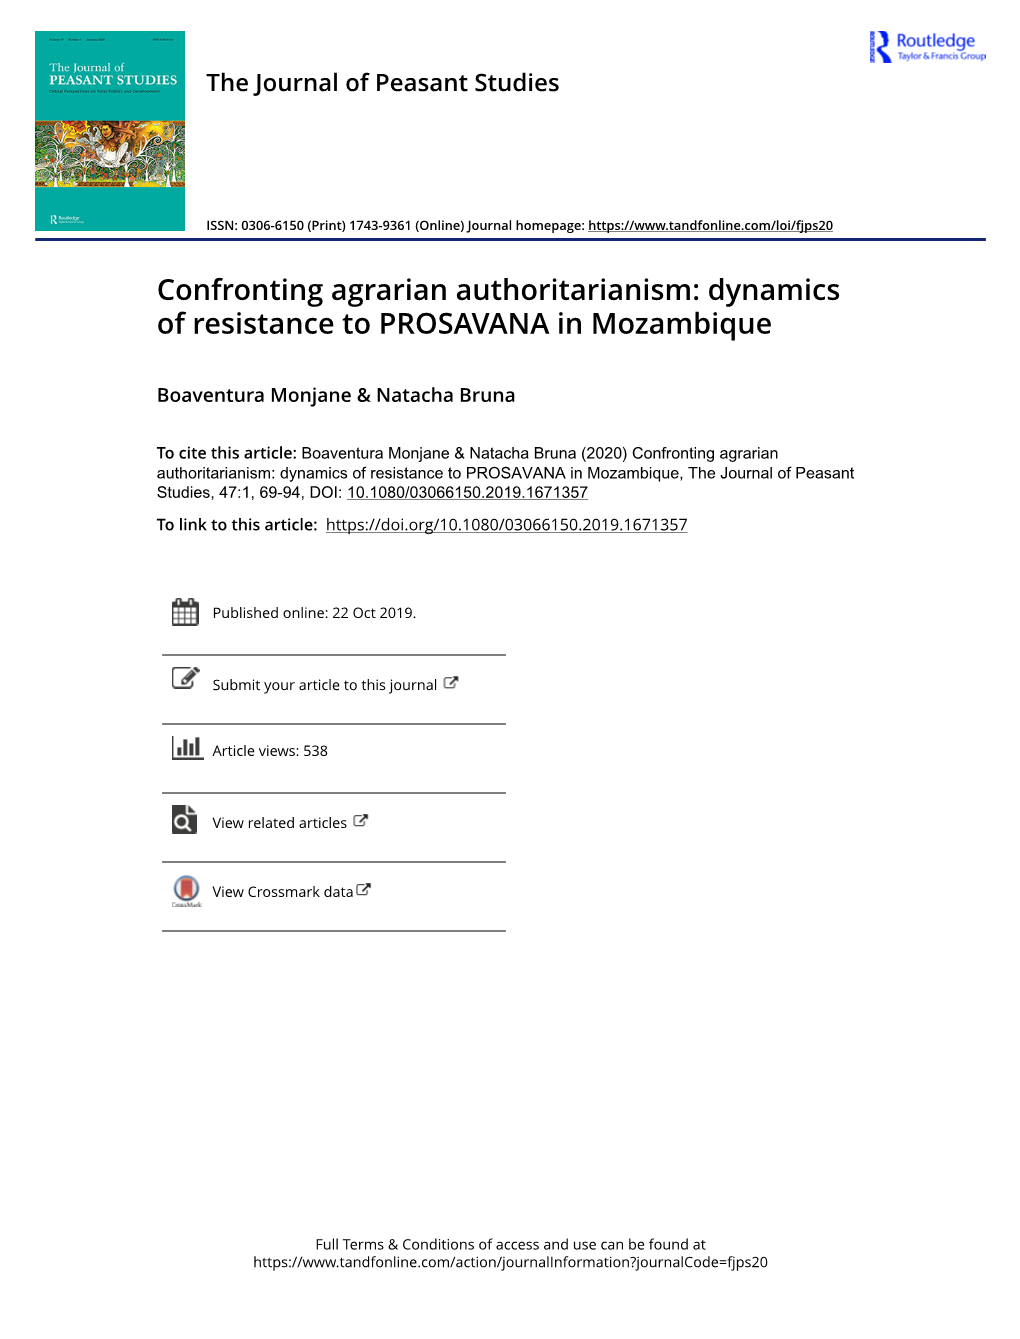 Dynamics of Resistance to PROSAVANA in Mozambique